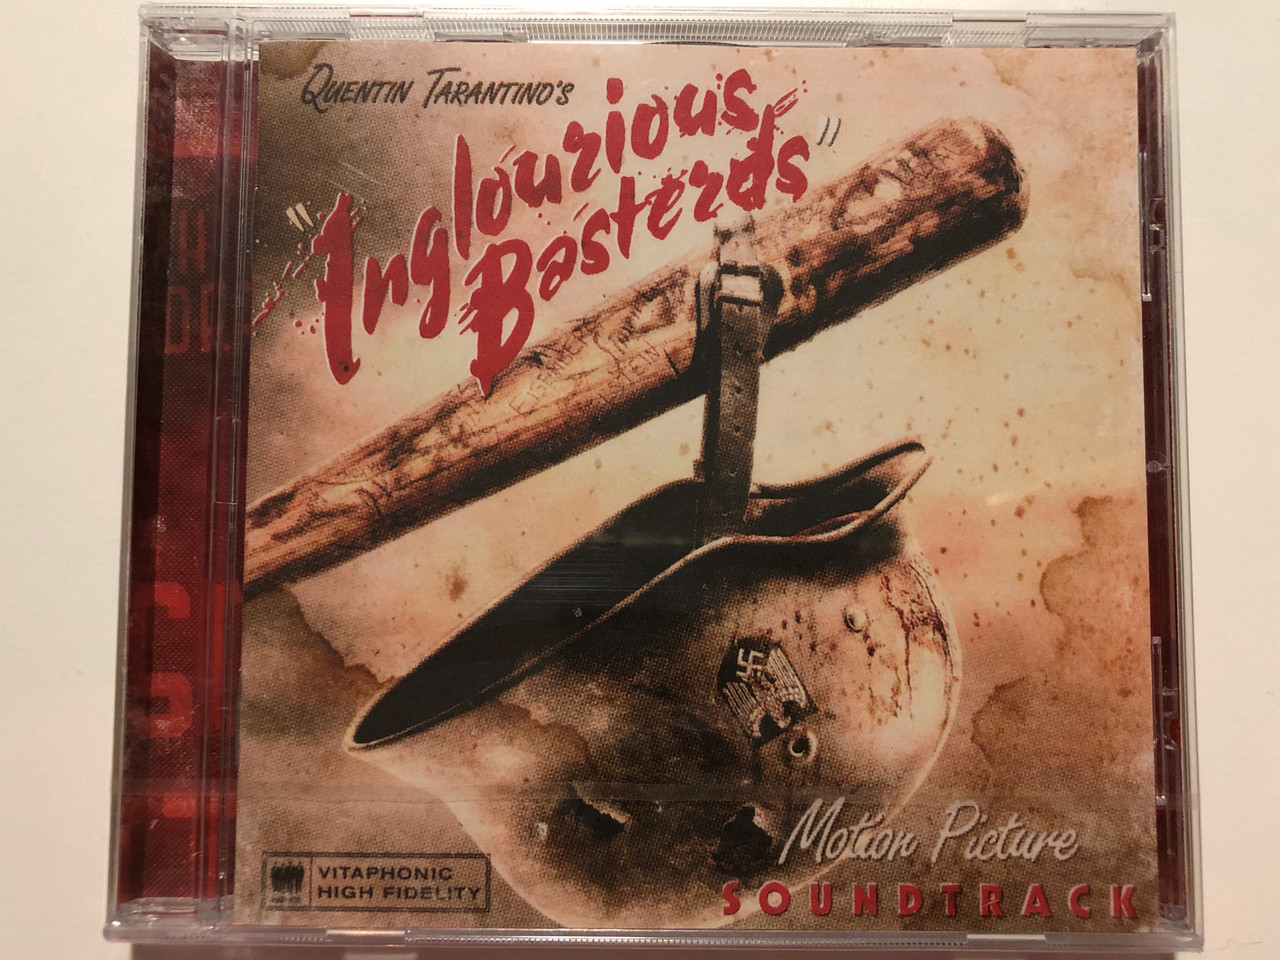 https://cdn10.bigcommerce.com/s-62bdpkt7pb/products/29765/images/177251/Quentin_Tarantinos_Inglourious_Basterds_Motion_Picture_Soundtrack_A_Band_Apart_Audio_CD_2009_9362-49744-4_1__59593.1620029713.1280.1280.JPG?c=2&_ga=2.202148306.2142011239.1620029029-598537477.1620029029